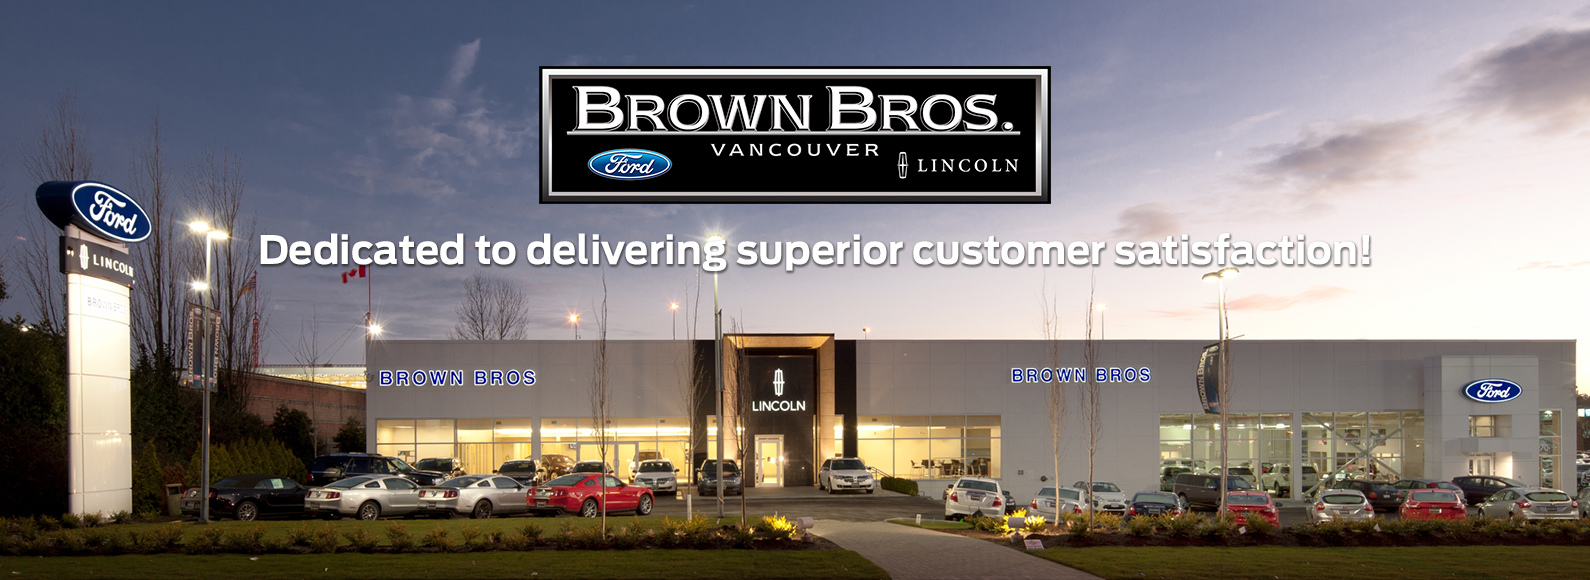 Brown bros ford new inventory #4